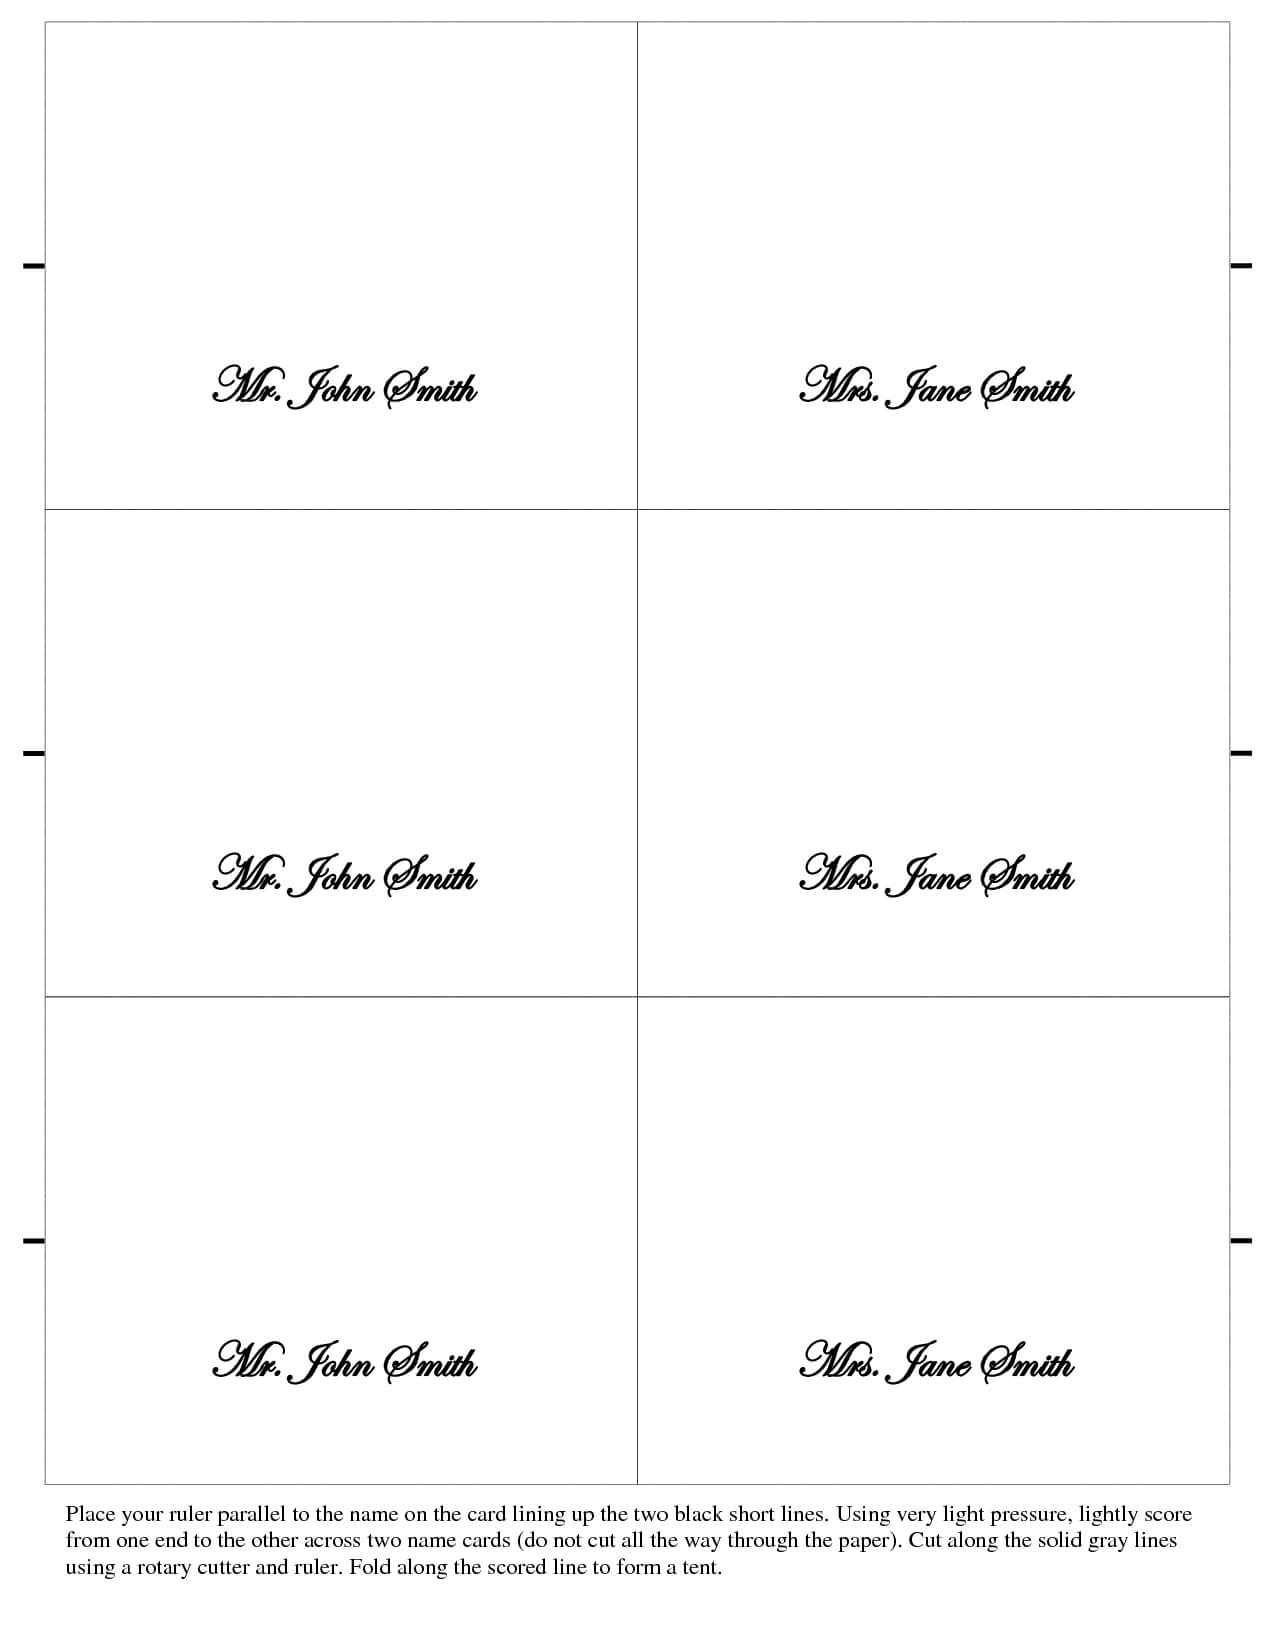 003 Free Place Card Template Ideas Table Mwd108673 Vert With Regard To Microsoft Word Place Card Template